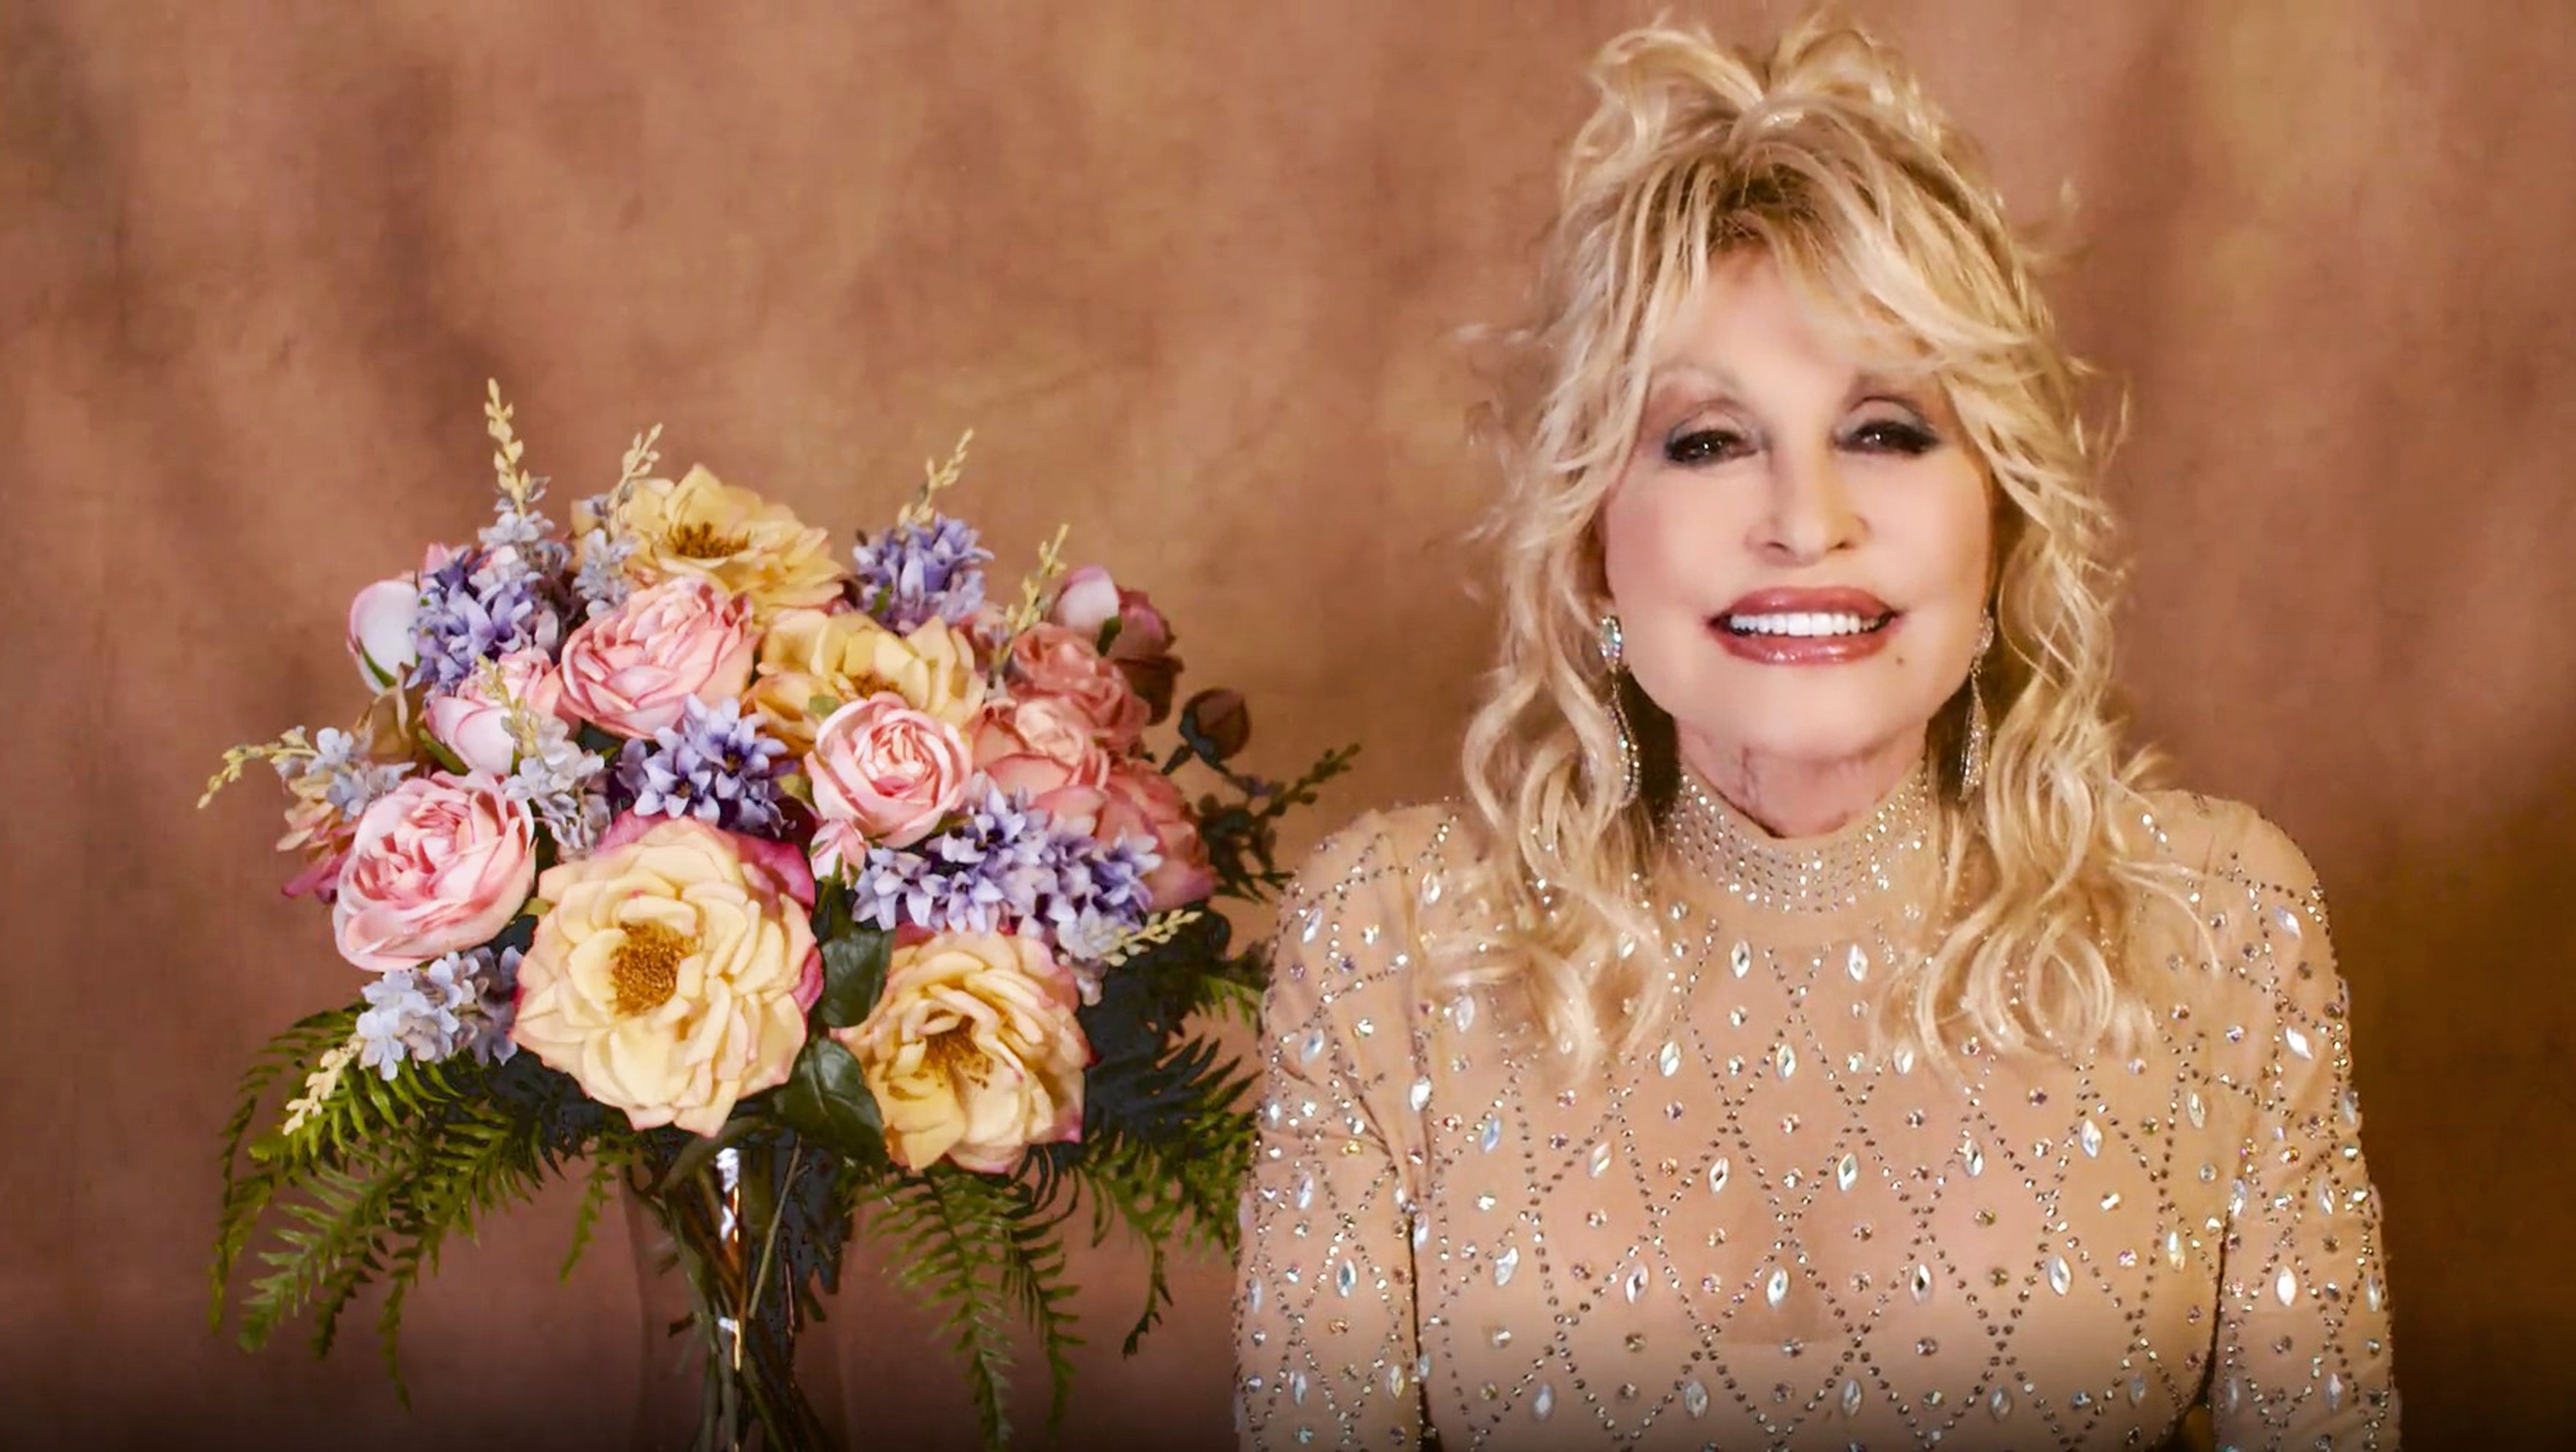 A close-up of Dolly Parton sitting next to a vase filled with flowers.